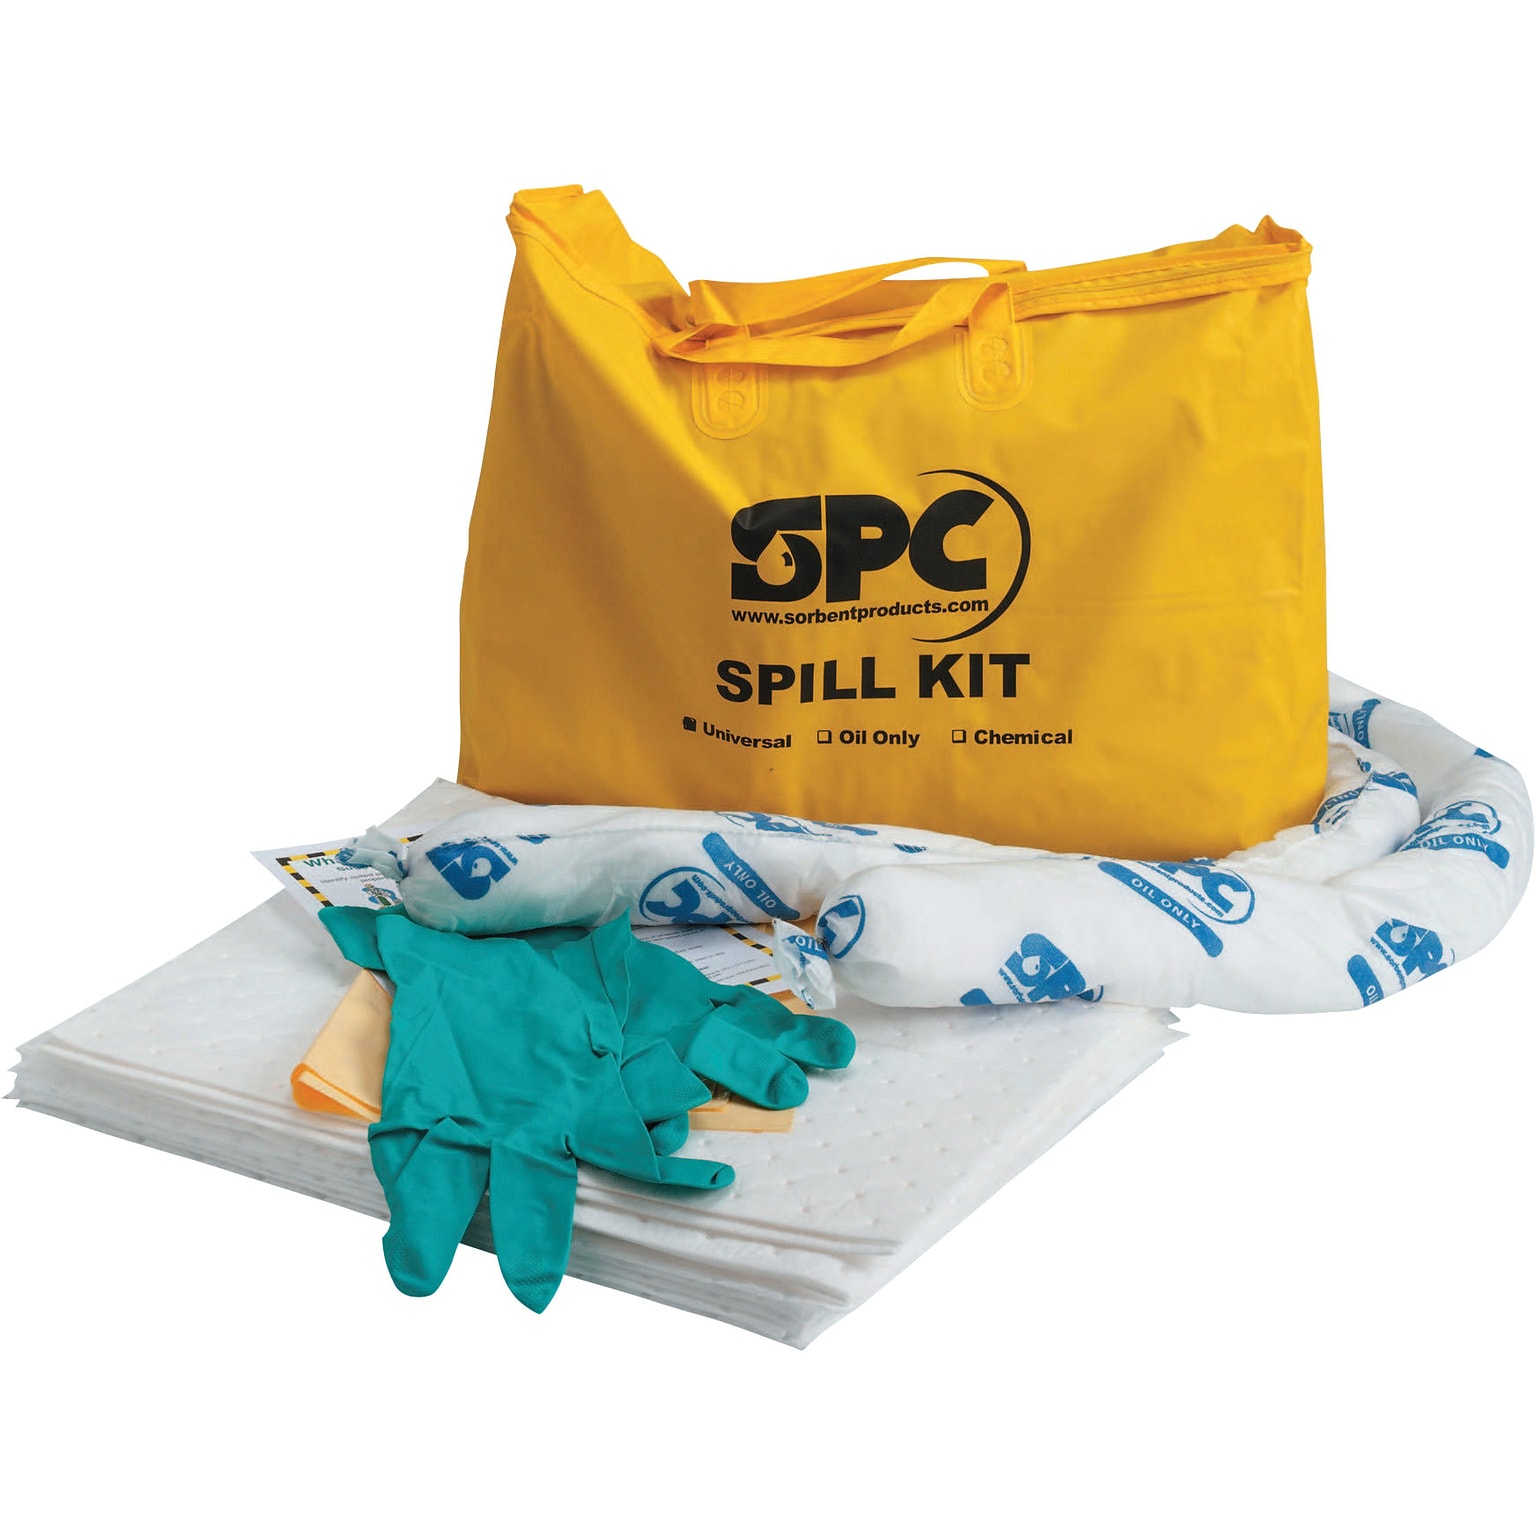 DBS SPC Economy Portable Spill Kit, Oil Only, 15 gal